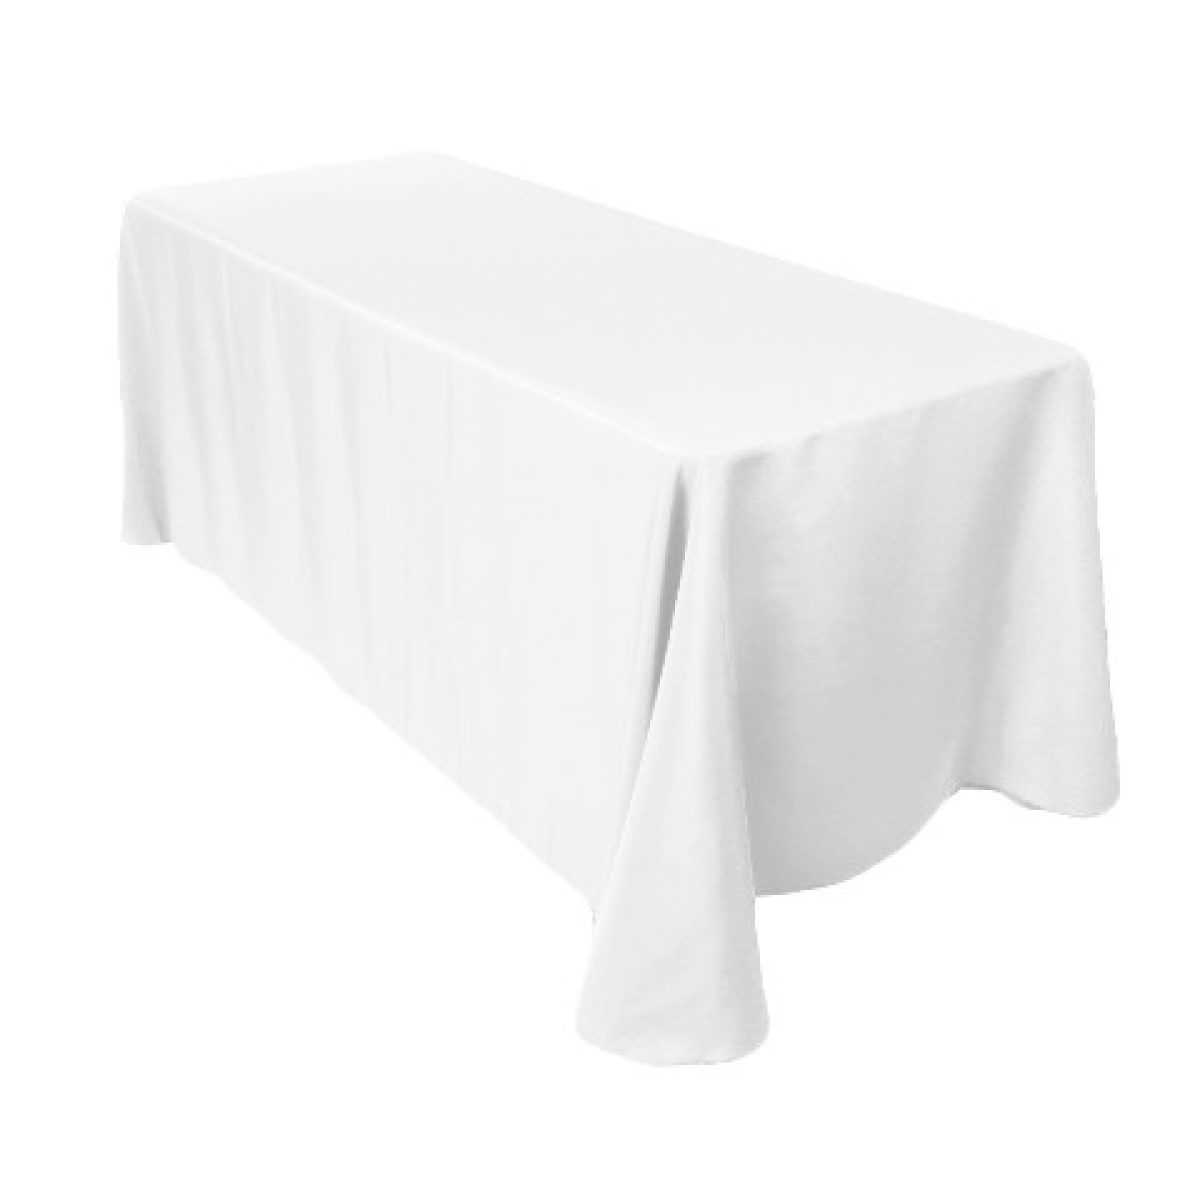 8′ Table Drape (90″ x 156″ Linen fits 8′ table to floor)